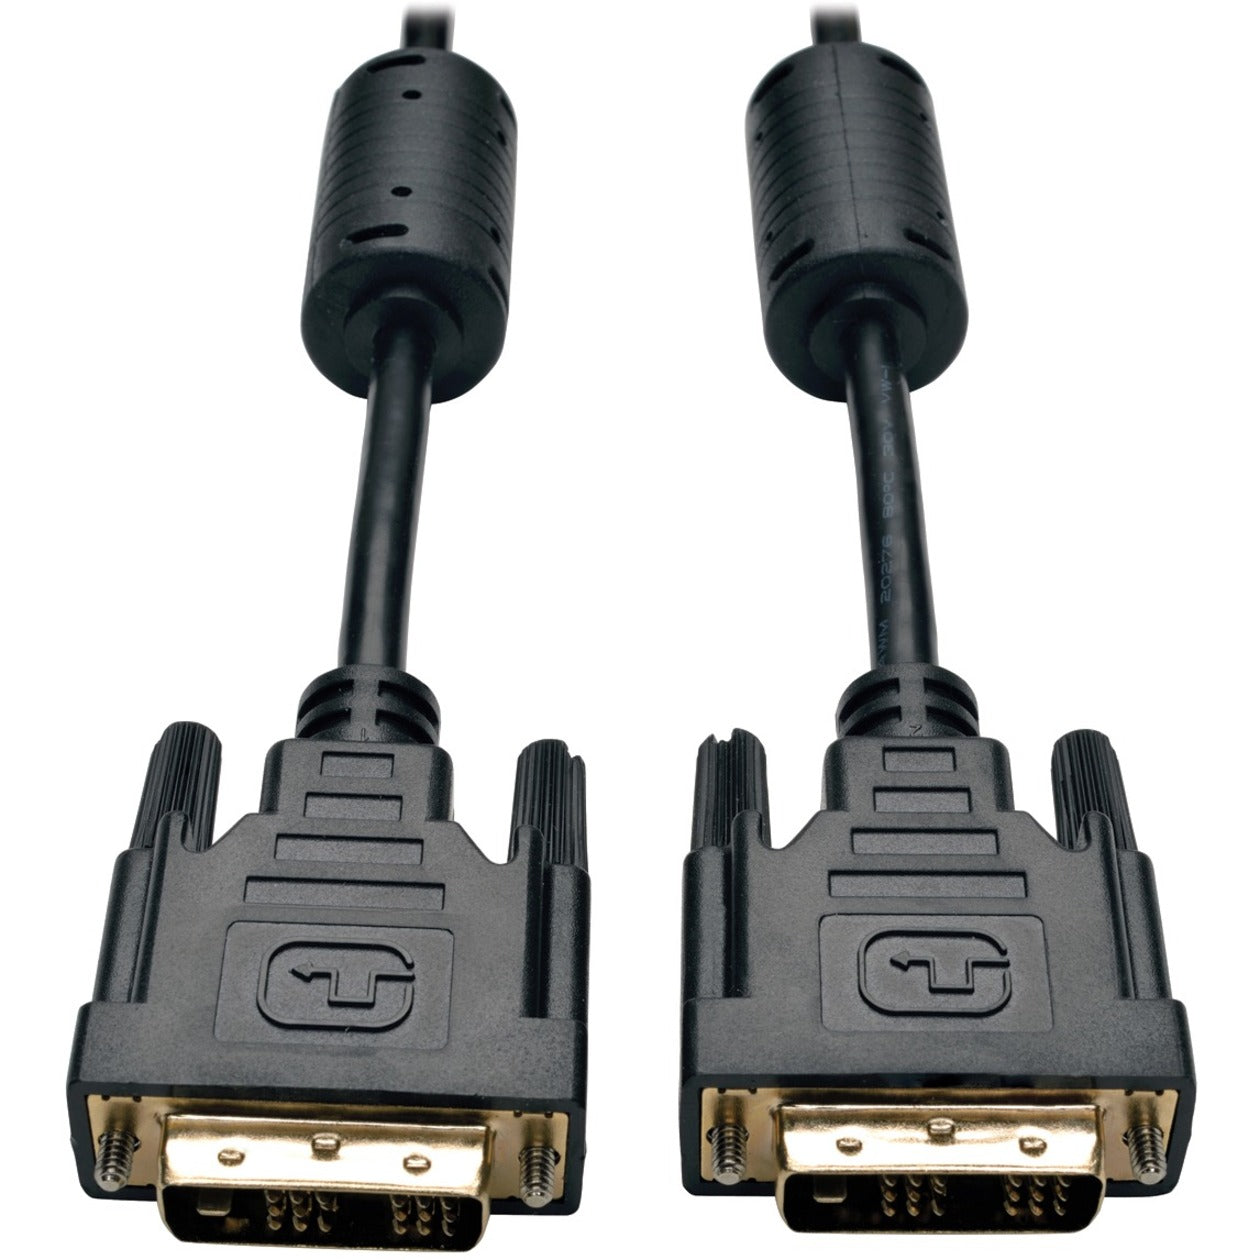 Tripp Lite P561-025 DVI Single Link Cable, 25-ft, Gold-Plated Connectors, 1920 x 1200 Resolution